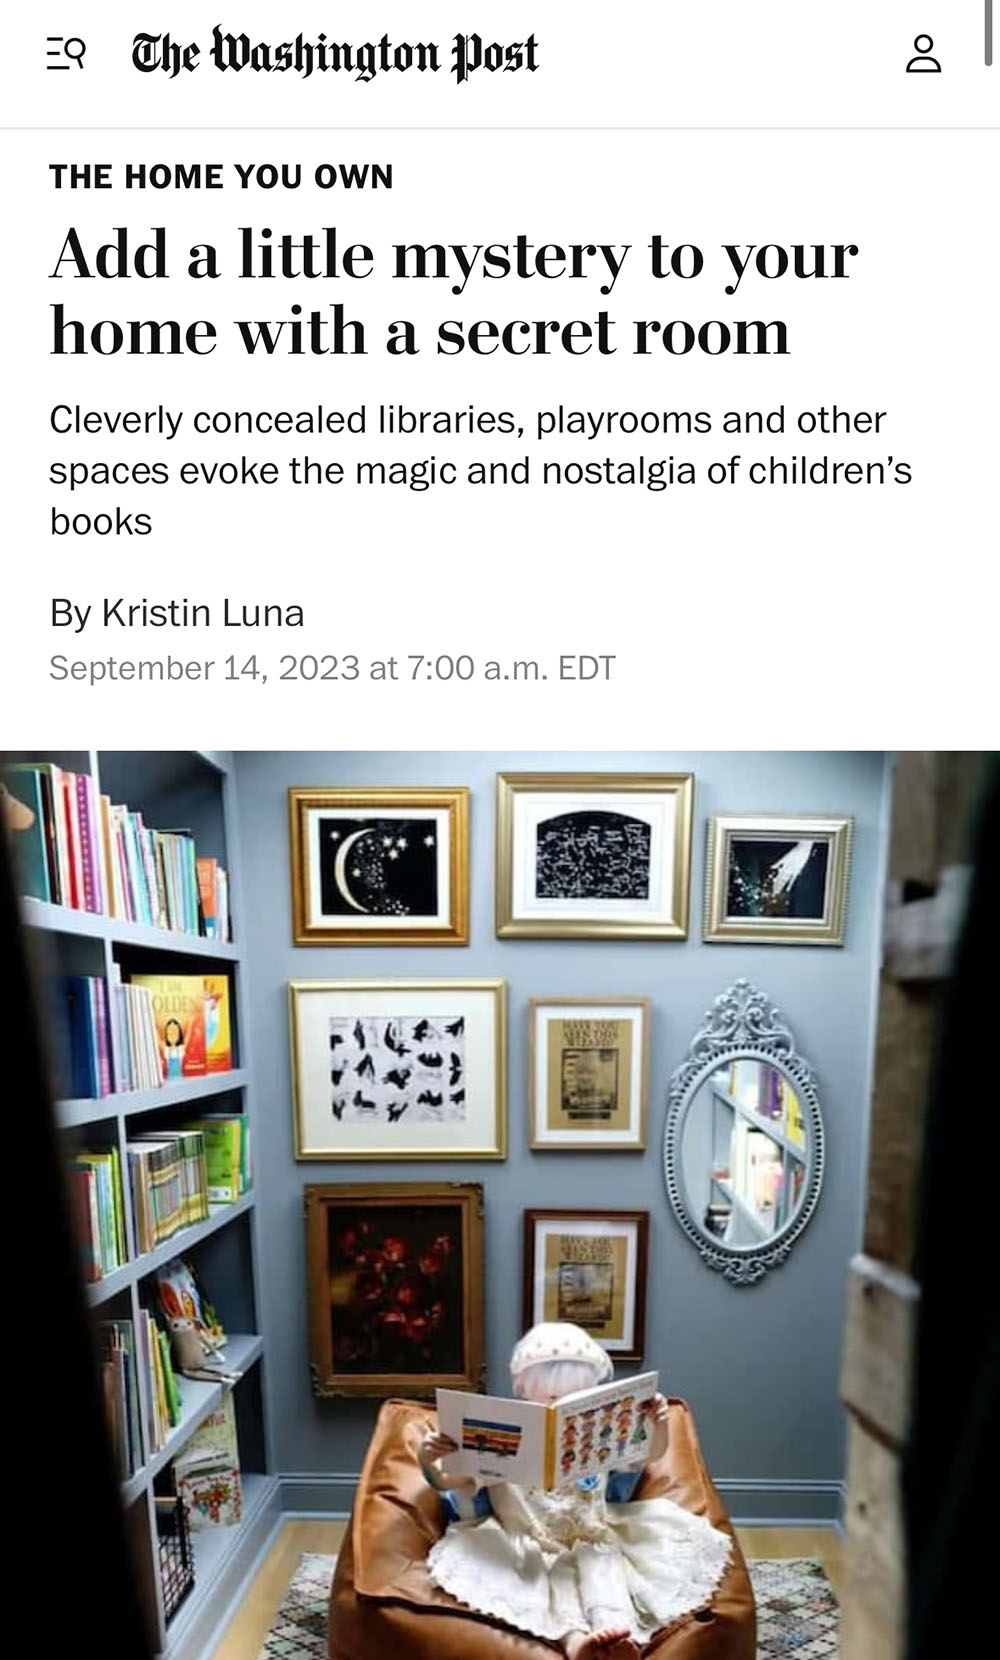 Washington Post story about hidden rooms